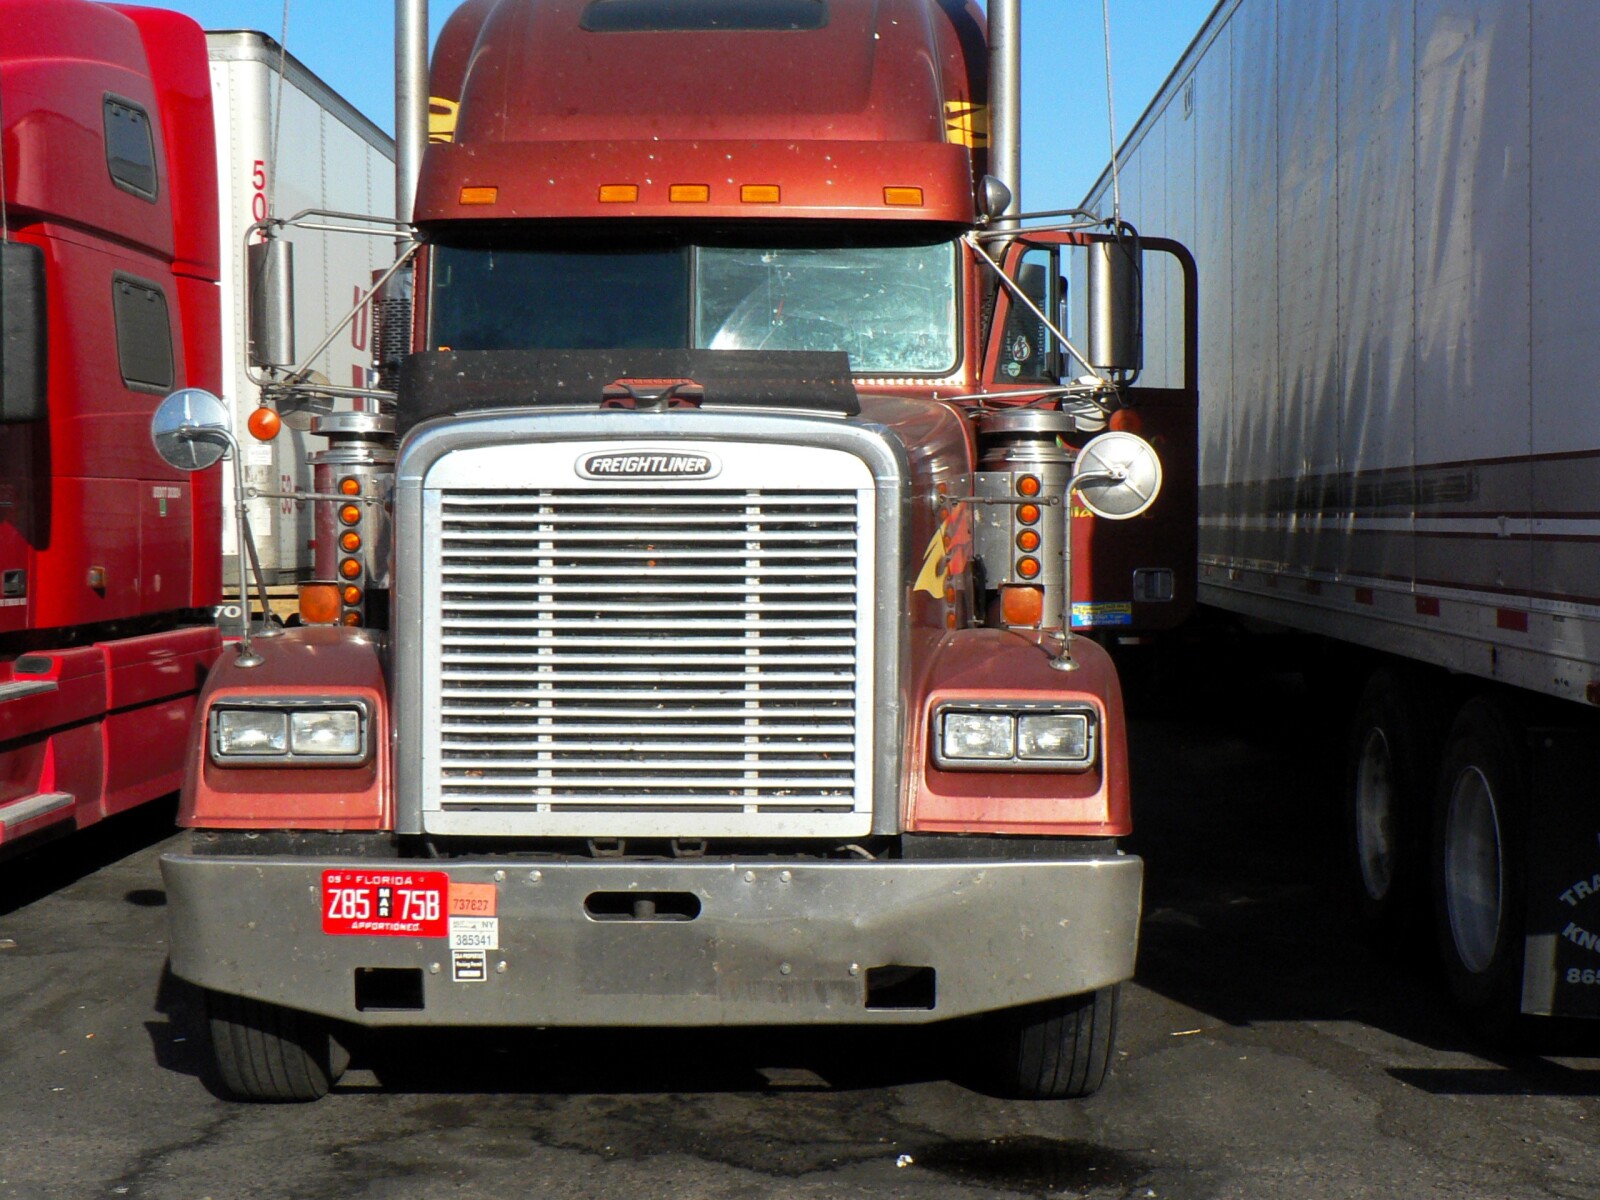 Truck Accidents: Devastating Injuries and Legal Battles